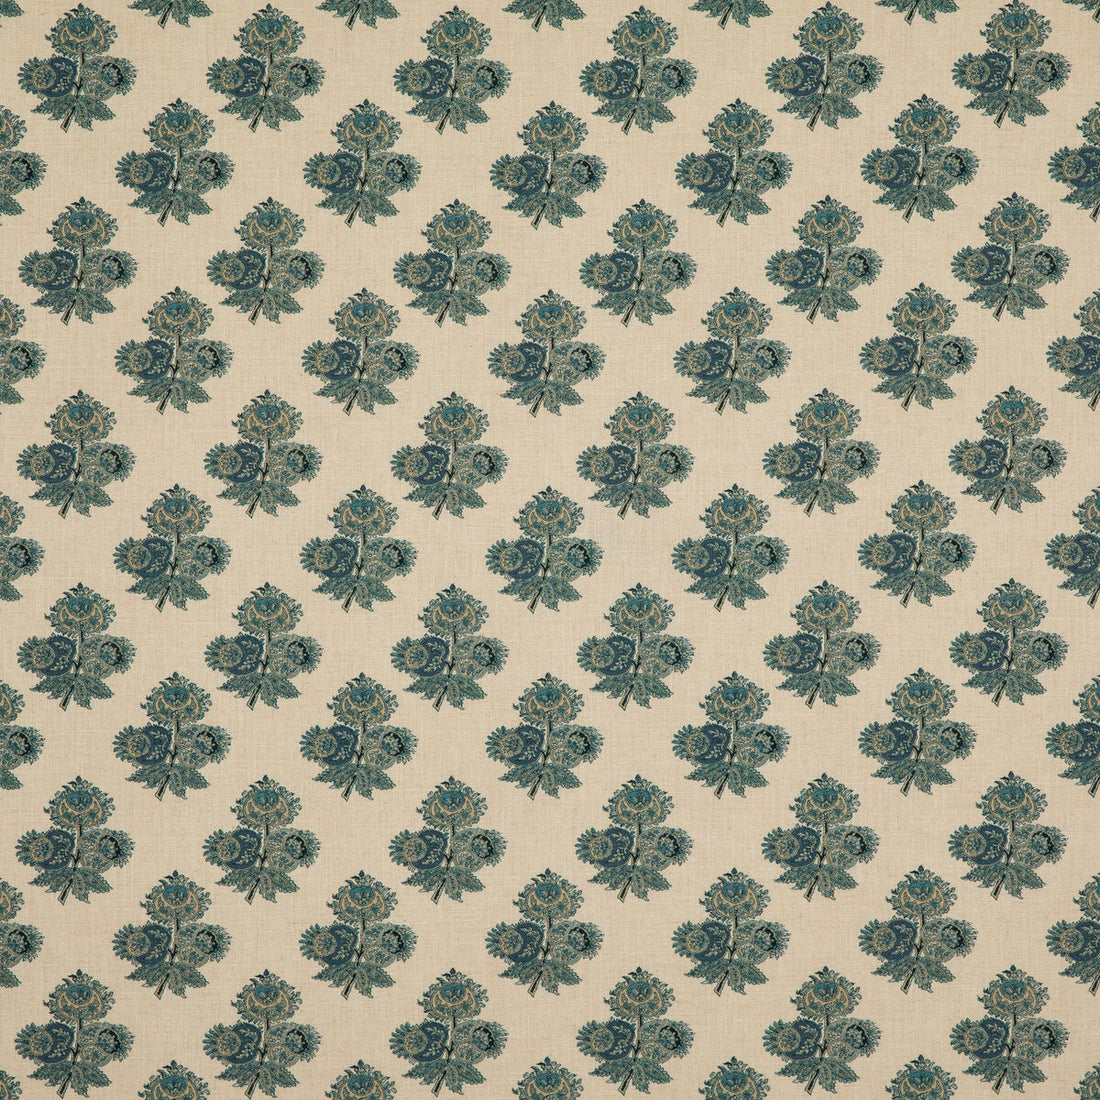 Poppy Paisley fabric in indigo color - pattern BP10823.2.0 - by G P &amp; J Baker in the Coromandel Small Prints collection